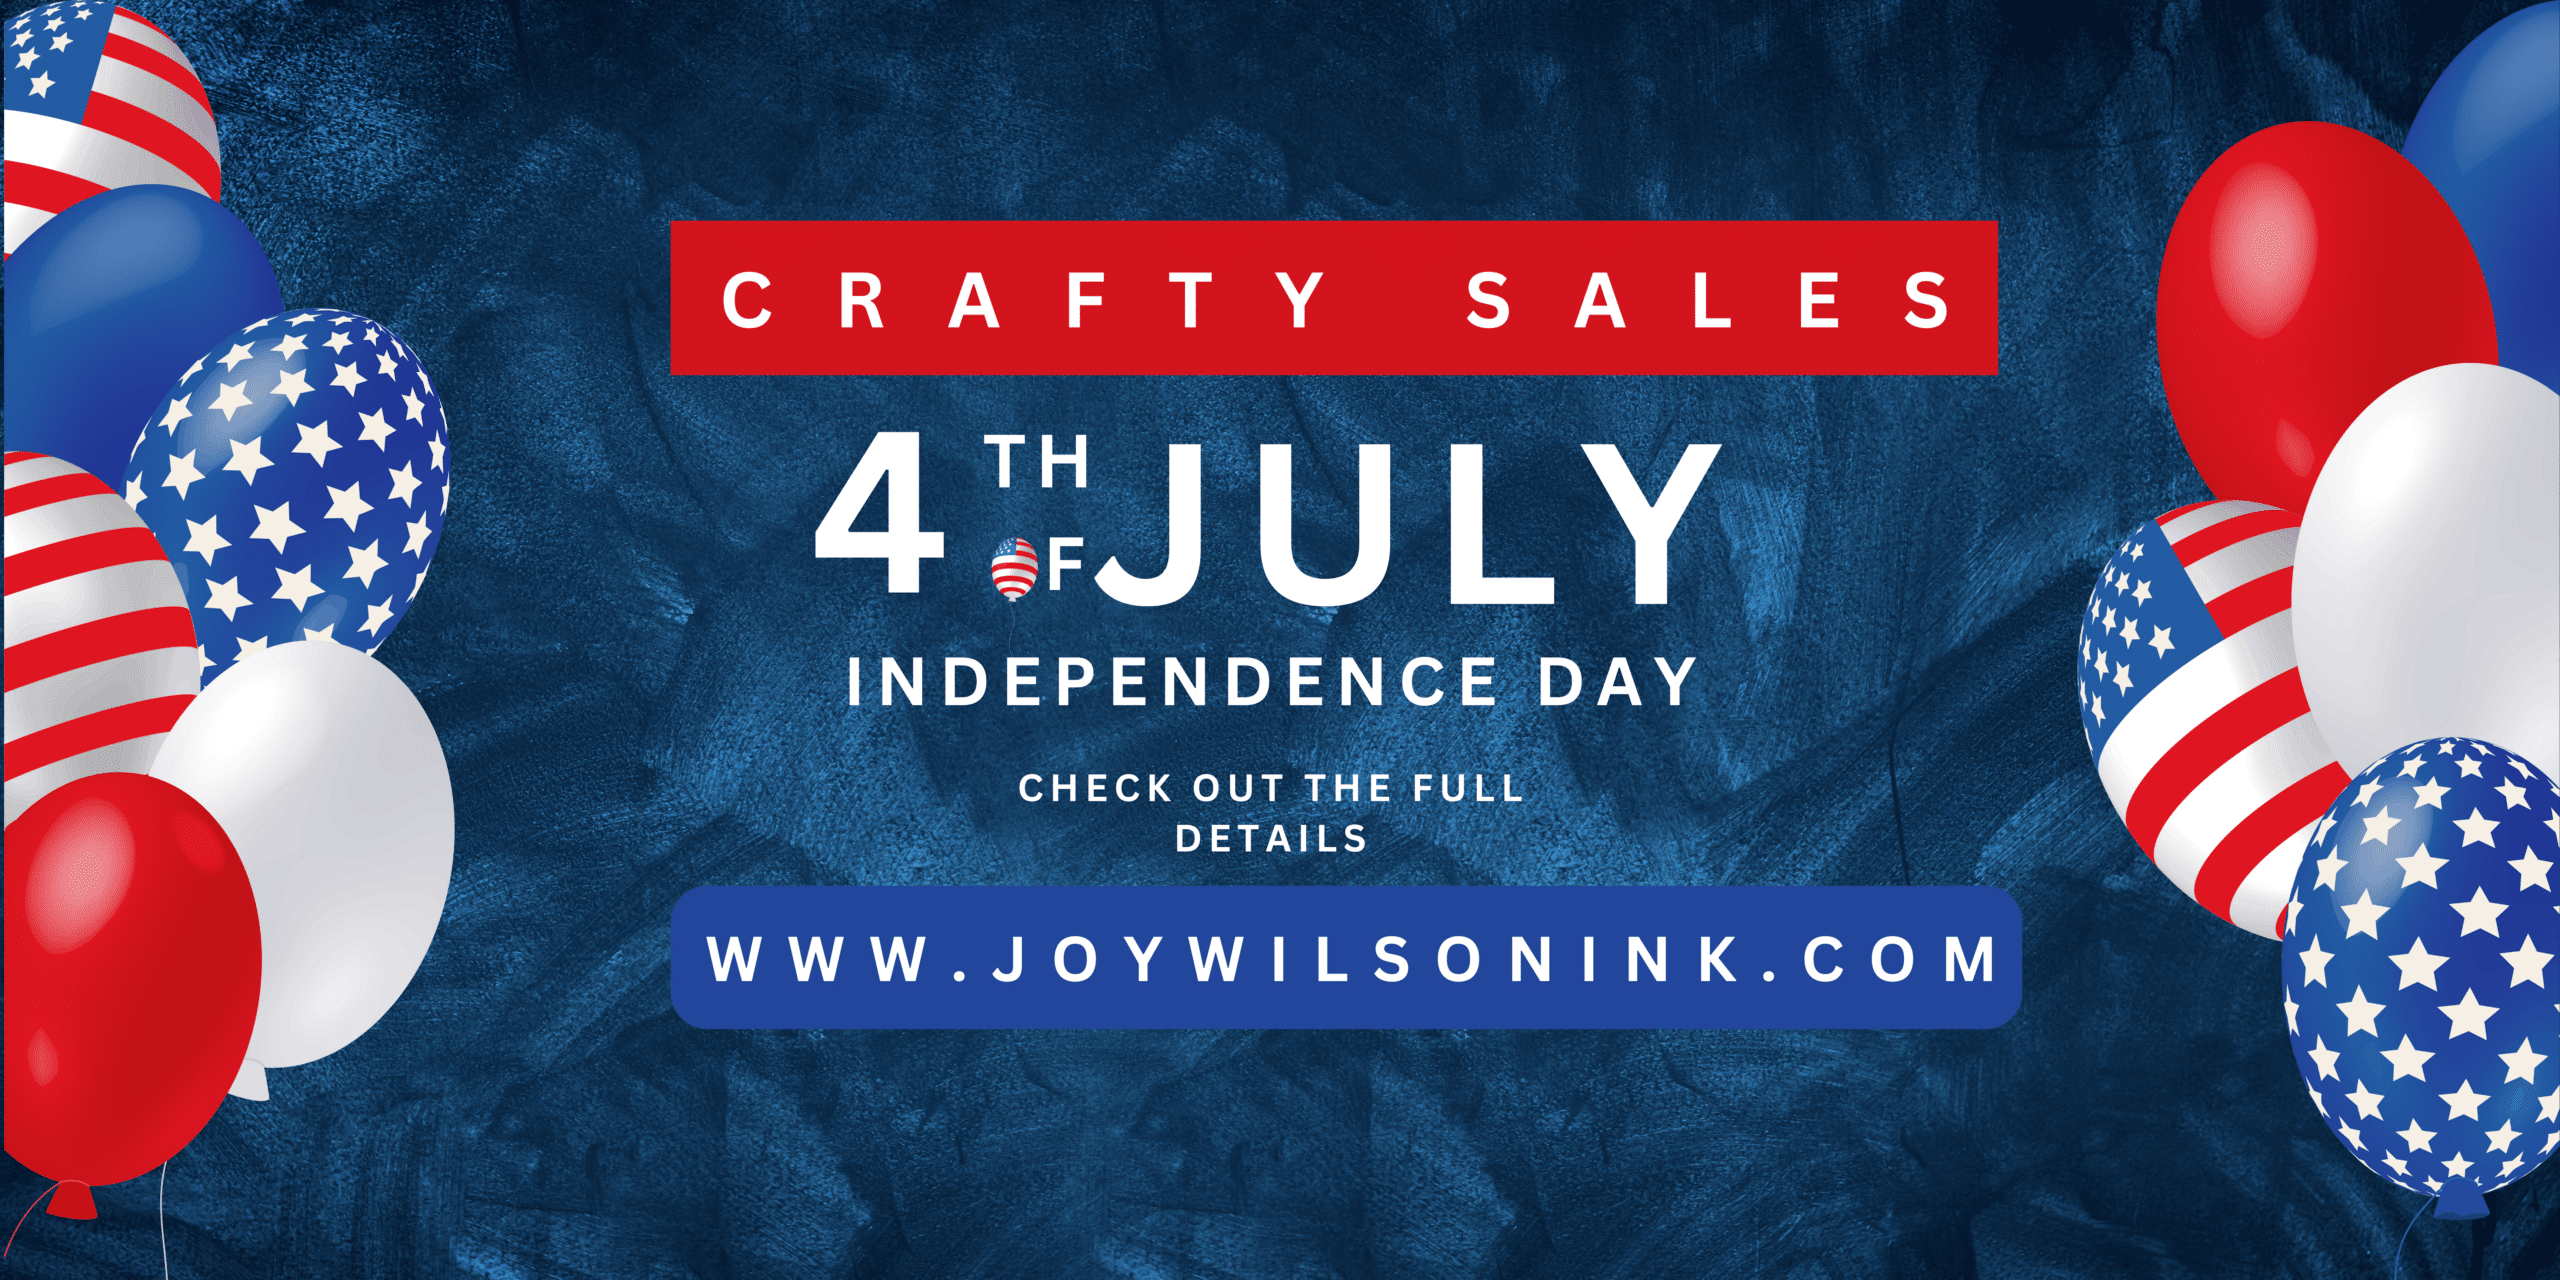 Independence Day Weekend Sales Going on Now